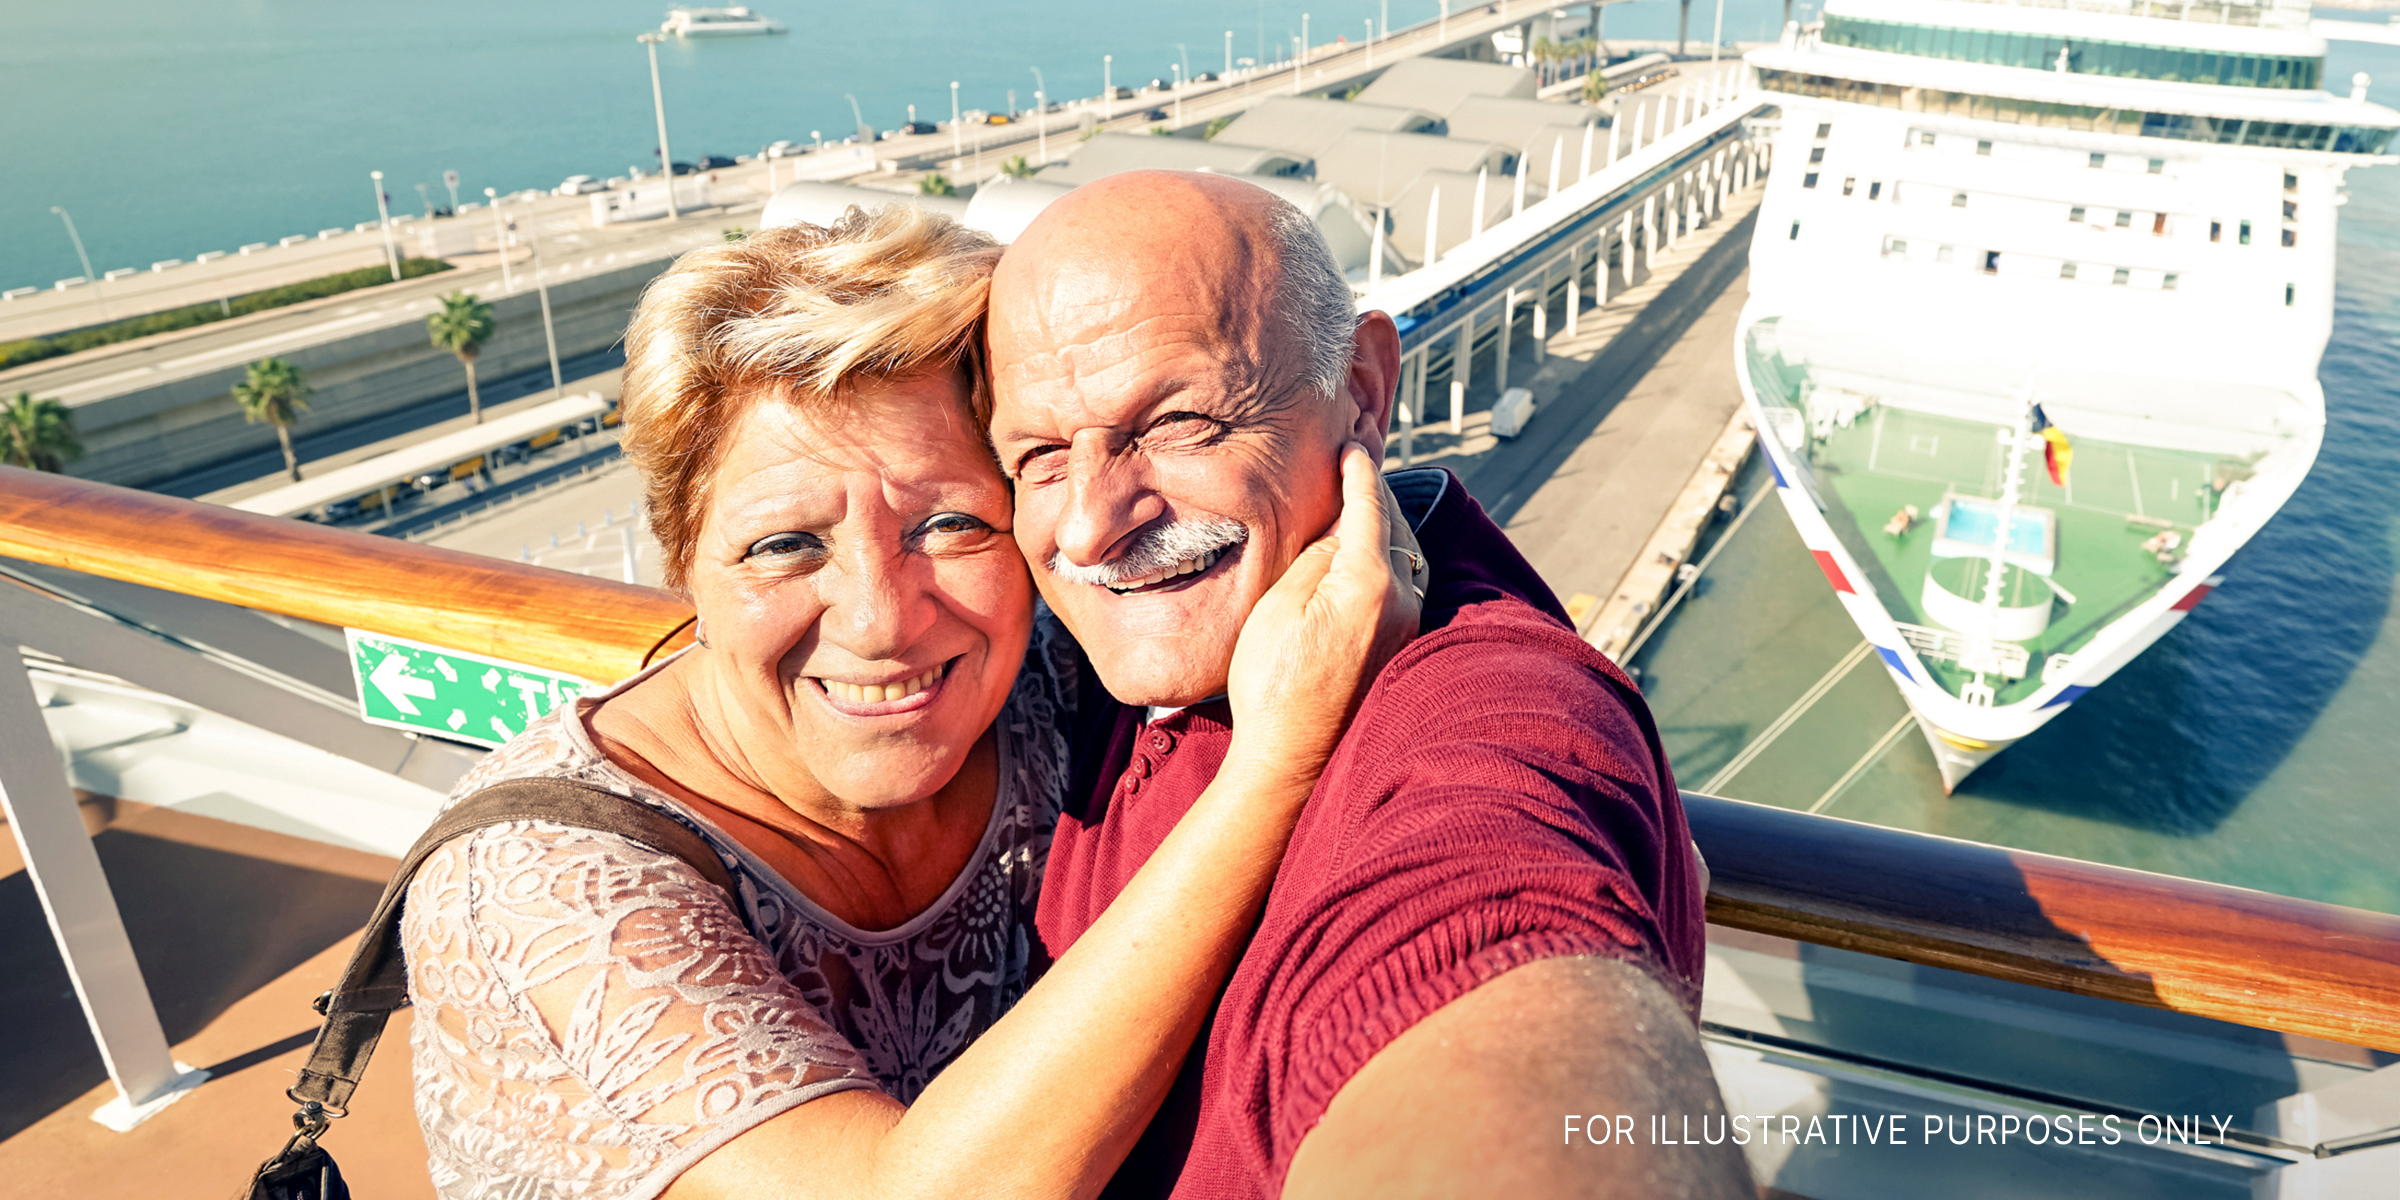 An elderly couple going on a cruise vacation | Source: Shutterstock